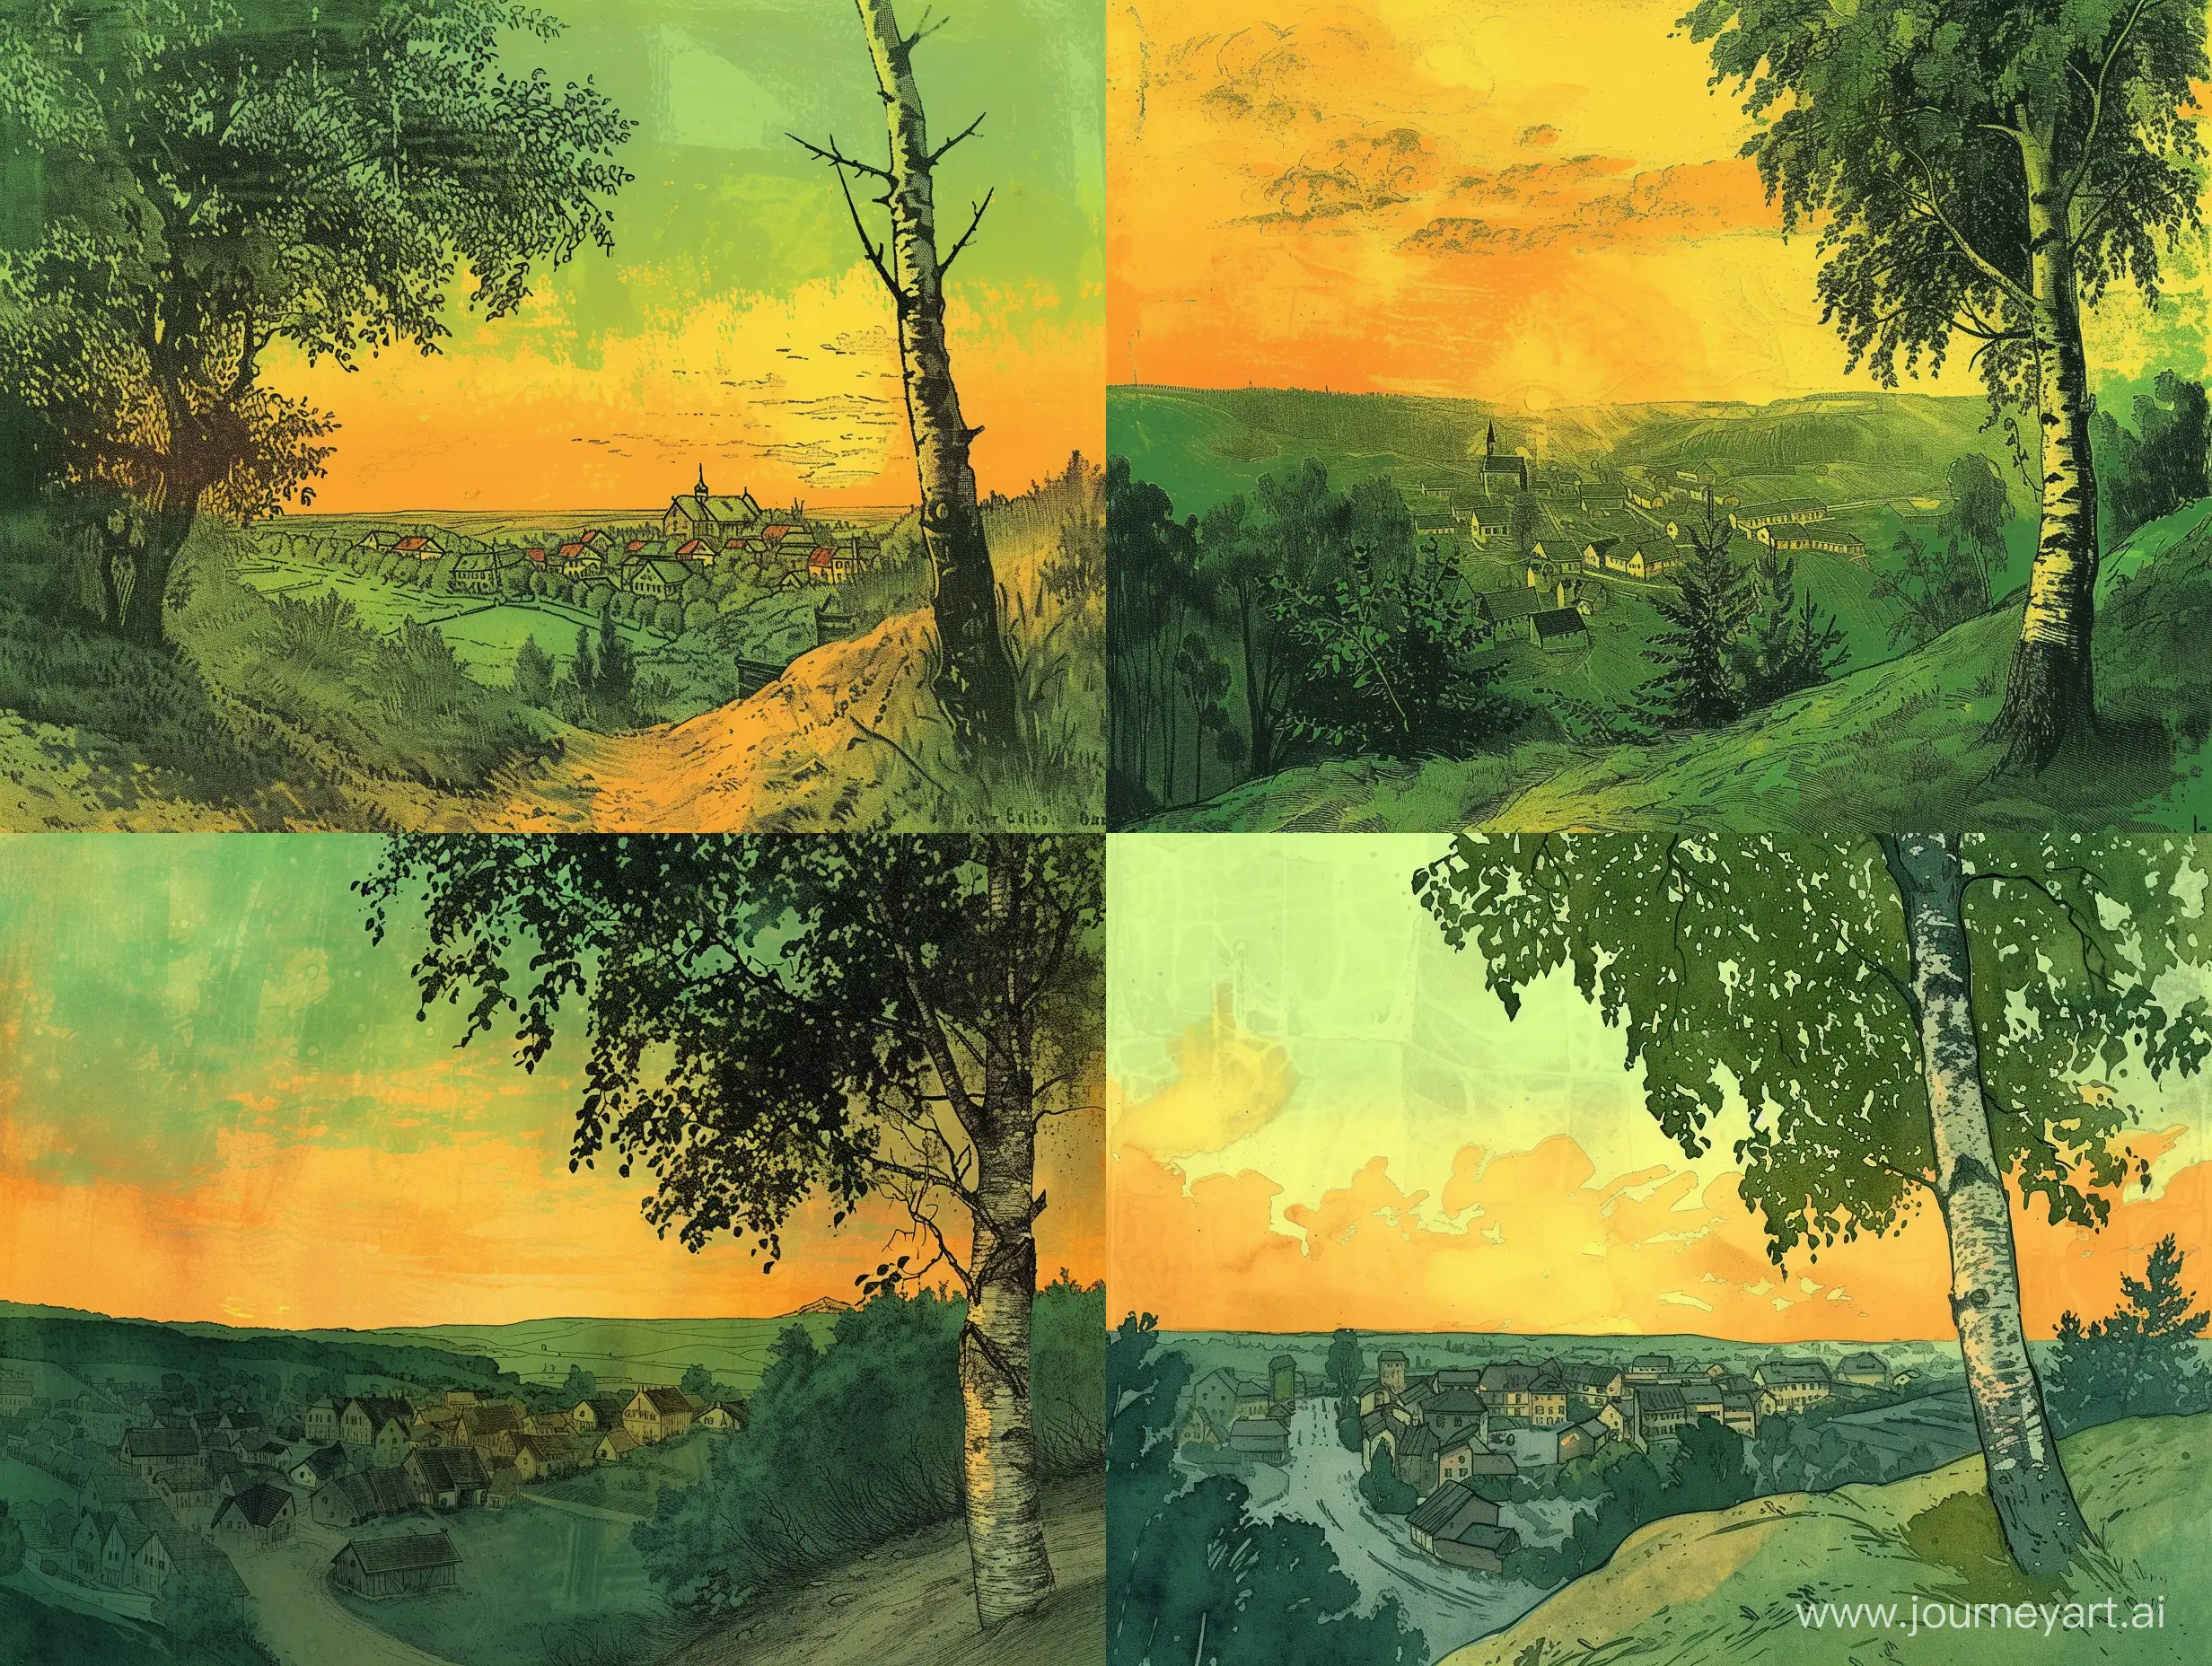 The landscape of the village in the style of an old illustration. The village is visible from a small hill, a birch tree next to the viewer (right side). Sunset, in green-yellow-orange tones.